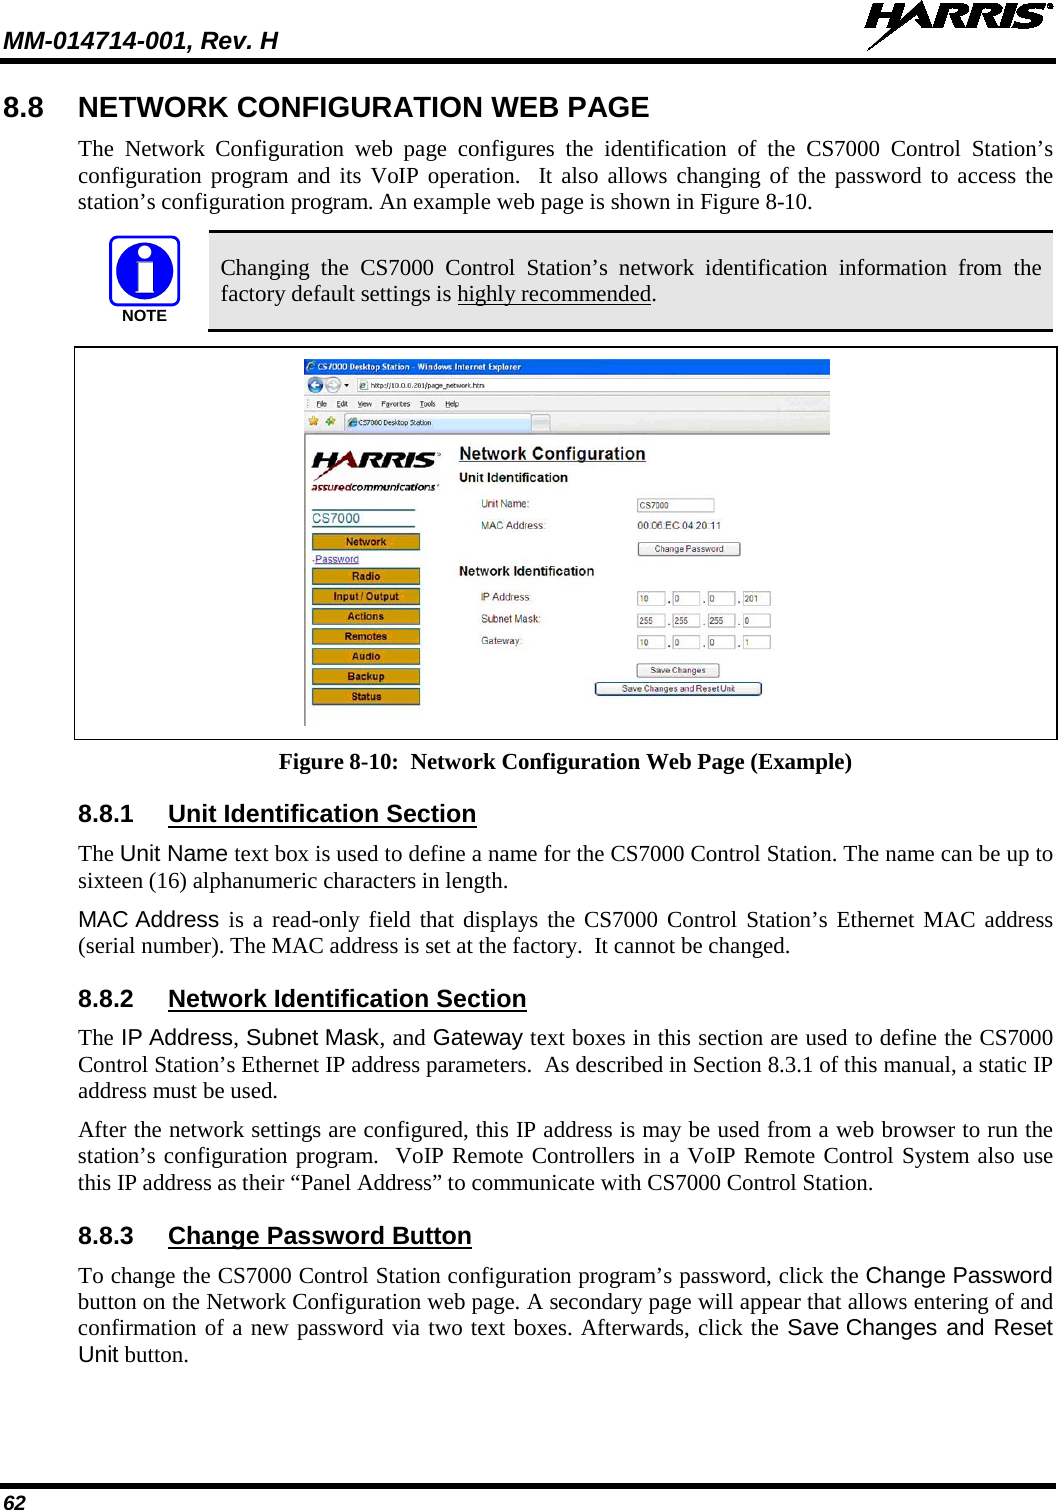 MM-014714-001, Rev. H   62 8.8 NETWORK CONFIGURATION WEB PAGE The Network Configuration web  page  configures the identification of the CS7000 Control Station’s configuration program and its VoIP operation.  It also allows changing of the password to access the station’s configuration program. An example web page is shown in Figure 8-10.   Changing  the CS7000 Control Station’s network identification information from  the factory default settings is highly recommended.   Figure 8-10:  Network Configuration Web Page (Example) 8.8.1 Unit Identification Section The Unit Name text box is used to define a name for the CS7000 Control Station. The name can be up to sixteen (16) alphanumeric characters in length. MAC Address is a read-only field that displays the CS7000 Control Station’s Ethernet MAC address (serial number). The MAC address is set at the factory.  It cannot be changed. 8.8.2 Network Identification Section The IP Address, Subnet Mask, and Gateway text boxes in this section are used to define the CS7000 Control Station’s Ethernet IP address parameters.  As described in Section 8.3.1 of this manual, a static IP address must be used. After the network settings are configured, this IP address is may be used from a web browser to run the station’s configuration program.  VoIP Remote Controllers in a VoIP Remote Control System also use this IP address as their “Panel Address” to communicate with CS7000 Control Station. 8.8.3 Change Password Button To change the CS7000 Control Station configuration program’s password, click the Change Password button on the Network Configuration web page. A secondary page will appear that allows entering of and confirmation of a new password via two text boxes. Afterwards, click the Save Changes and Reset Unit button. NOTE